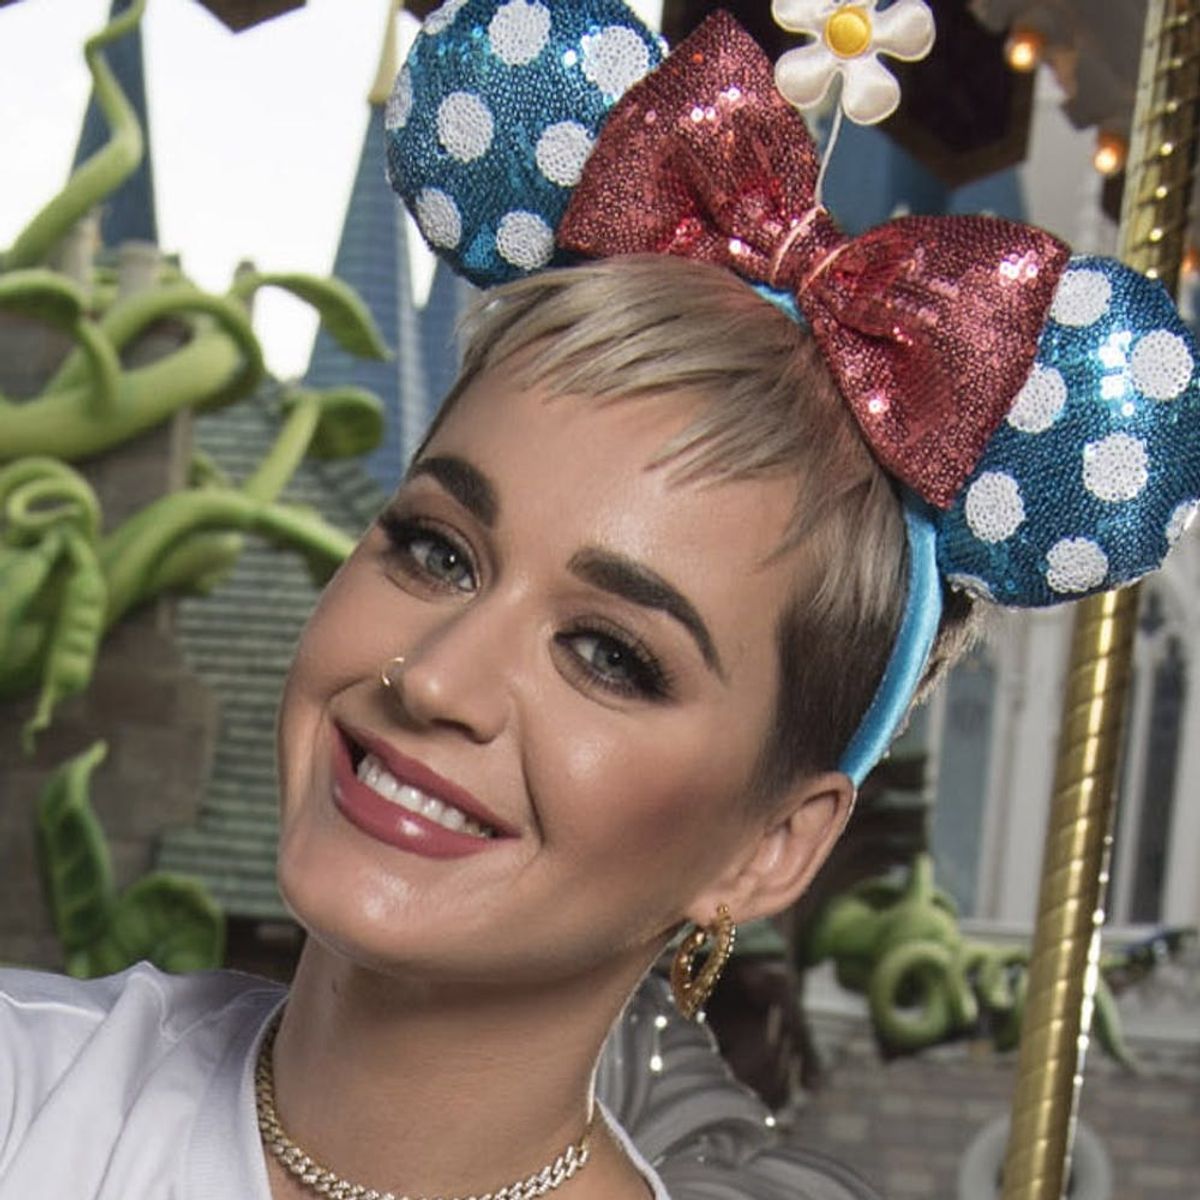 Katy Perry Is Practically Unrecognizable As Marie Antoinette in Her New Music Video